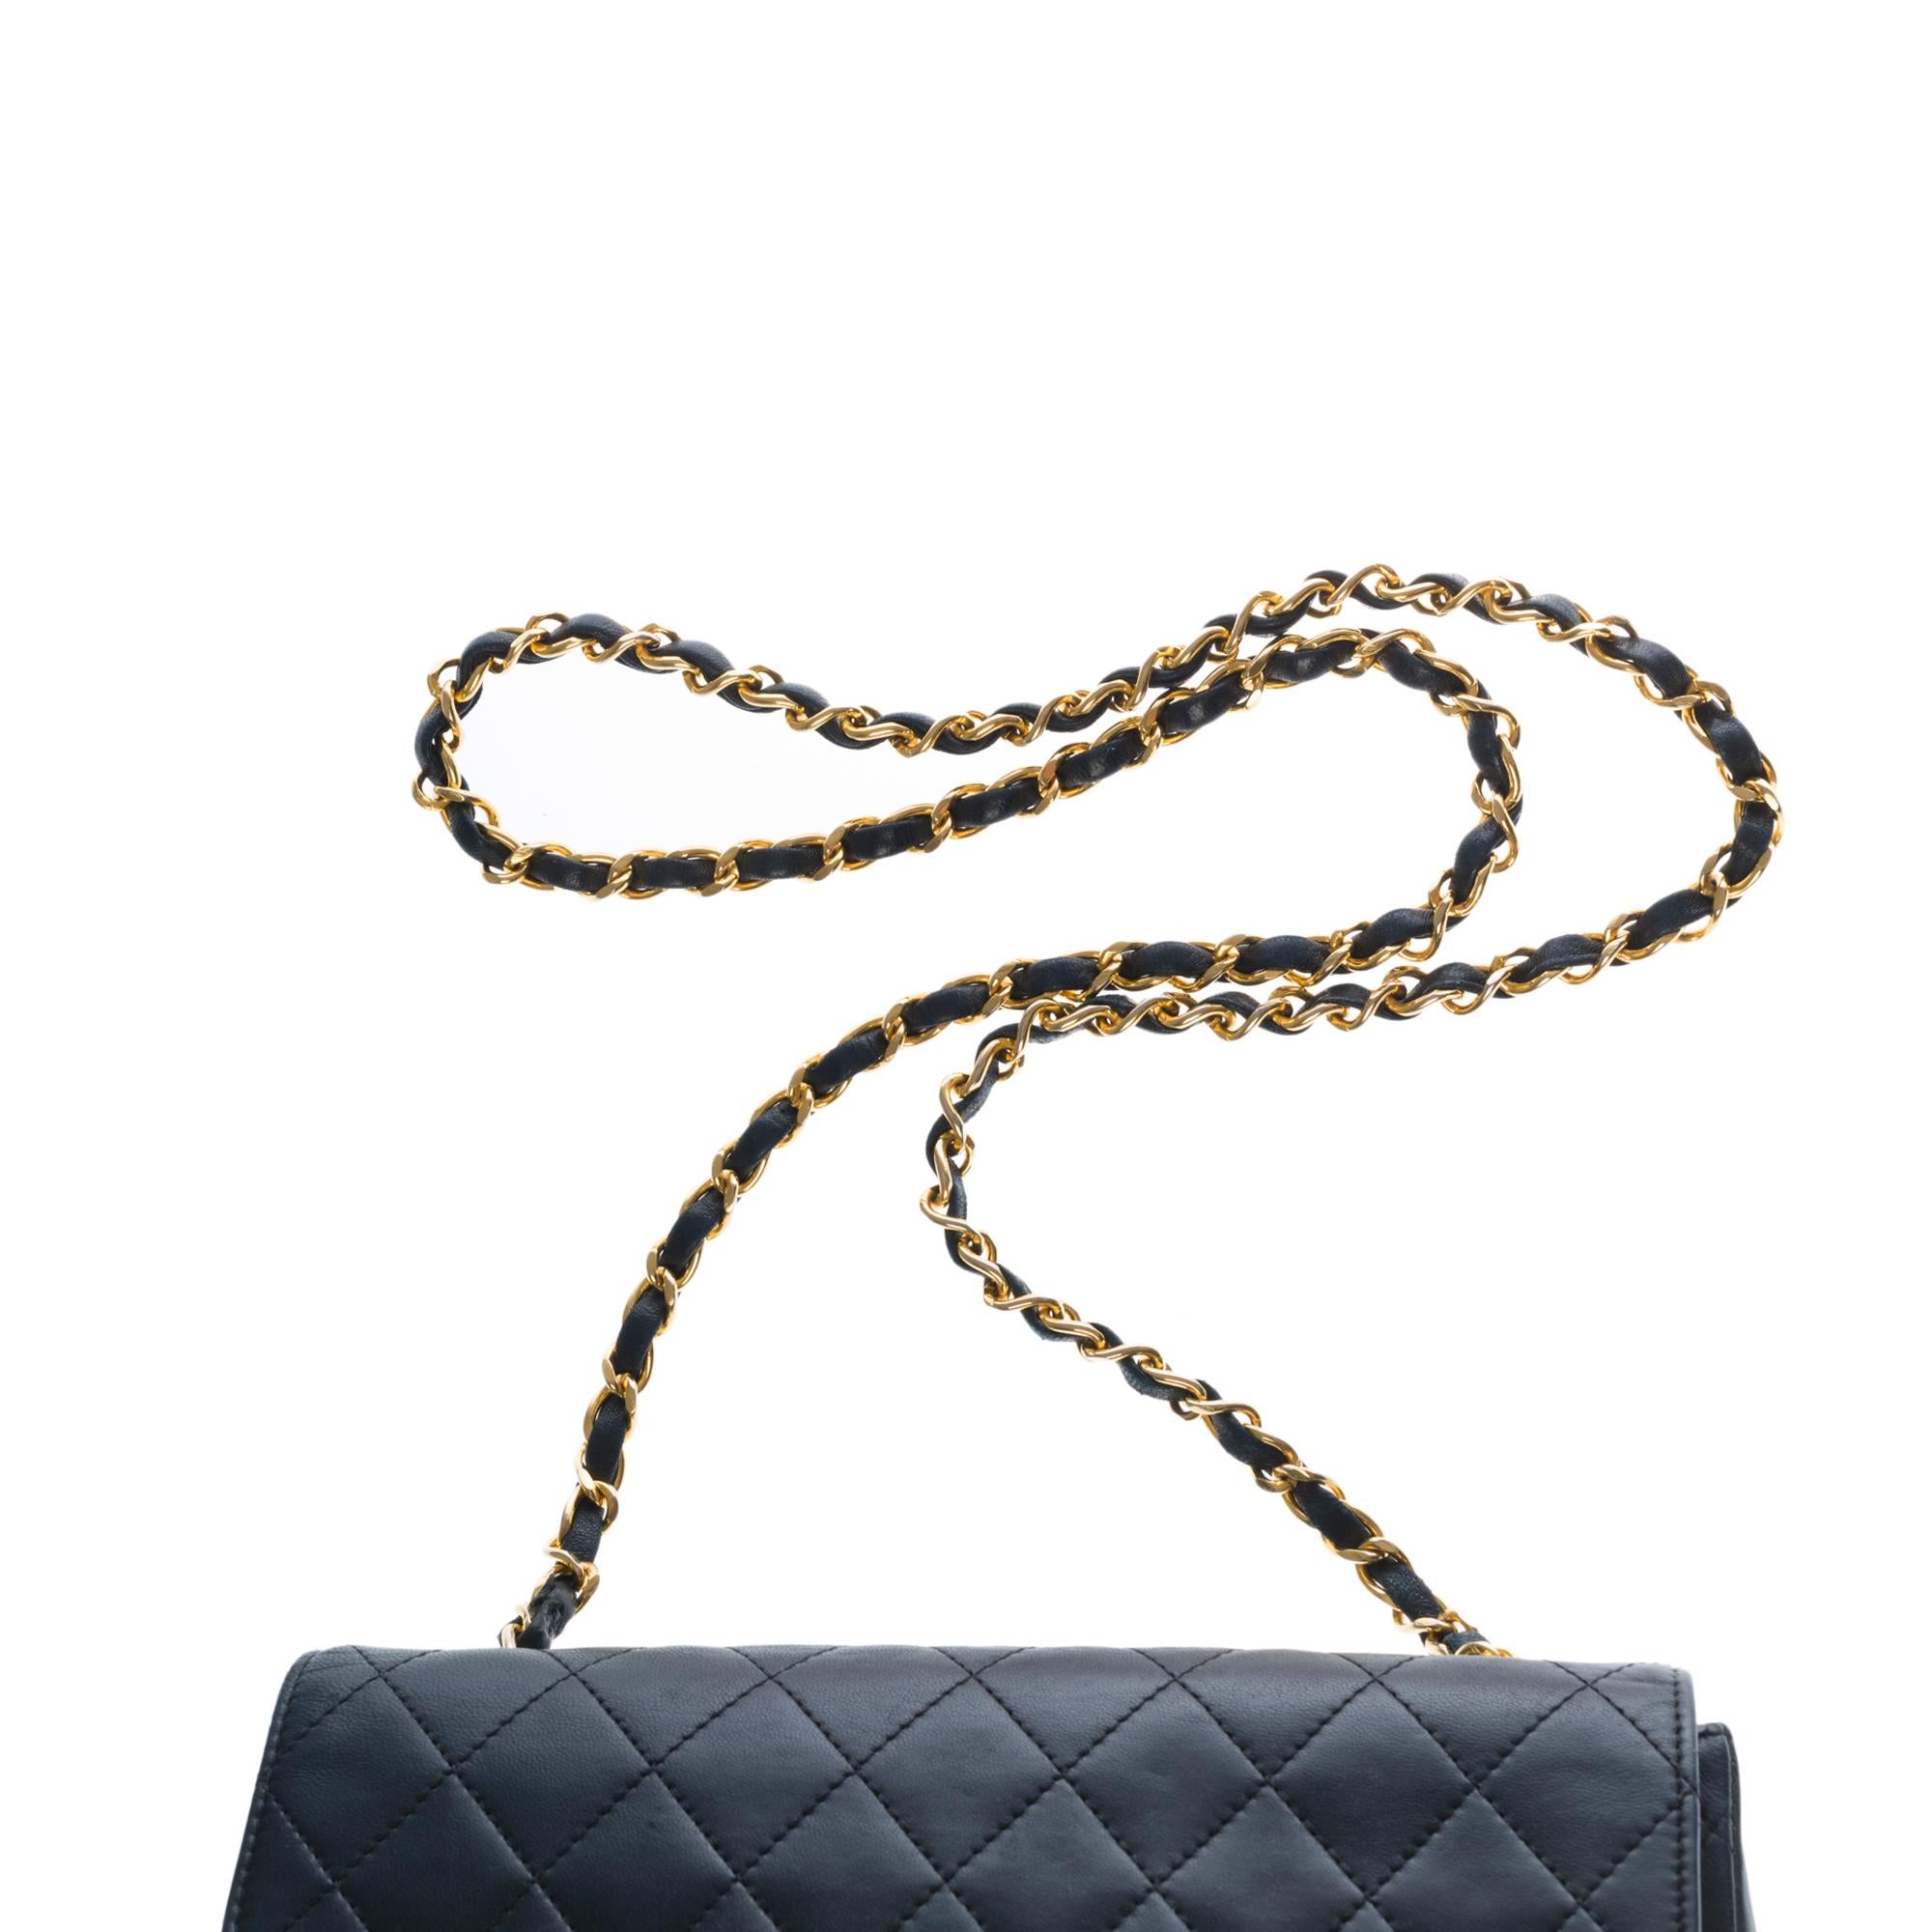 Chanel Classic Single Flap shoulder bag in Black quilted lambskin, GHW 4